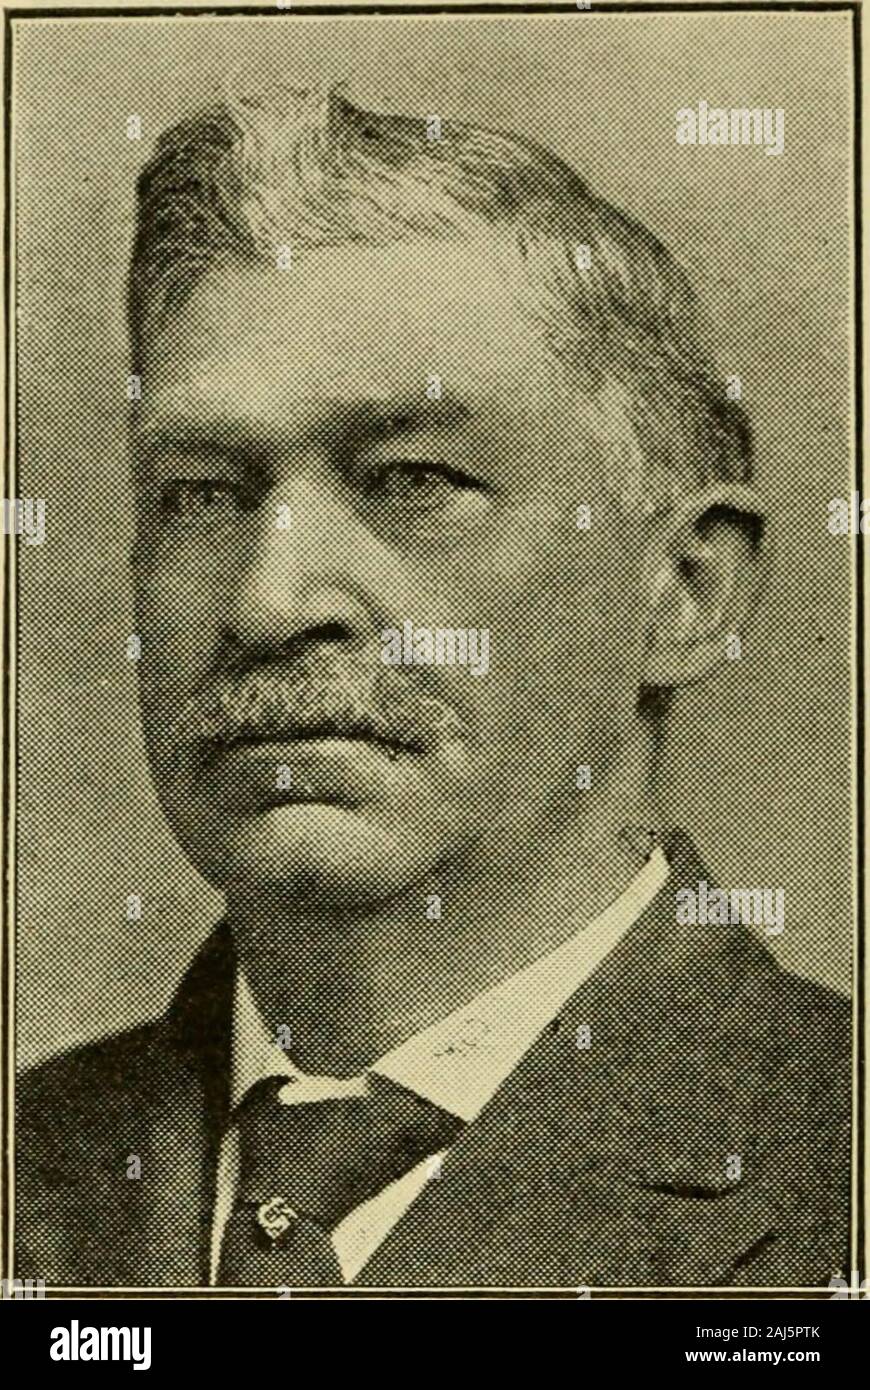 Public officials of Massachusetts . GLAZIER, FREDERICK P., Hudson,10th Middlesex House District, Republican. Born: Waltham, Sept. 2 7, 1859. Educated: Boston Univ. Med. School. Profession: Physician. Organizations: I. O. 0. F., Masons, A. O.U. V., Grange, Board of Trade, Nationaland State Medical Societies. Public office: Constitutional Convention,chmn. of Selectmen and Overseers of Poor,delegate Rep. Nat. Convention 1912, mem-ber Health Board, School Com,, Mass,House 1919, 1920. 163. GOFF, ALBERT C, Rehoboth, 5th Bris-tol House District, Republican. Born: Rehoboth, Dec. 6, 1858. Educated: Pu Stock Photo